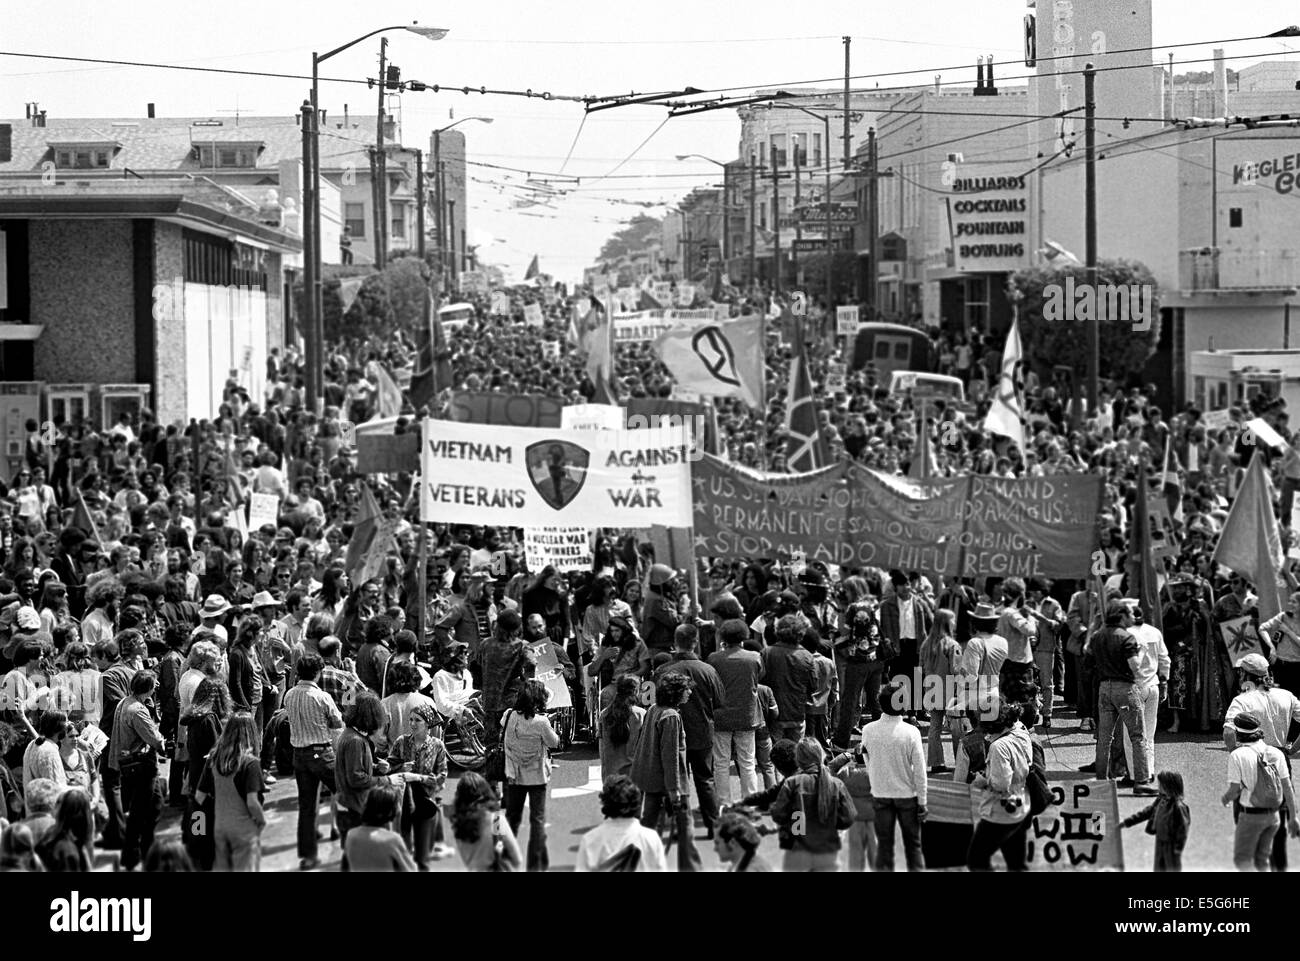 Anti-war protesters take to the street in San Francisco with the war in Vietnam still going on, and Richard Nixon U.S. President promising to end the war. Stock Photo